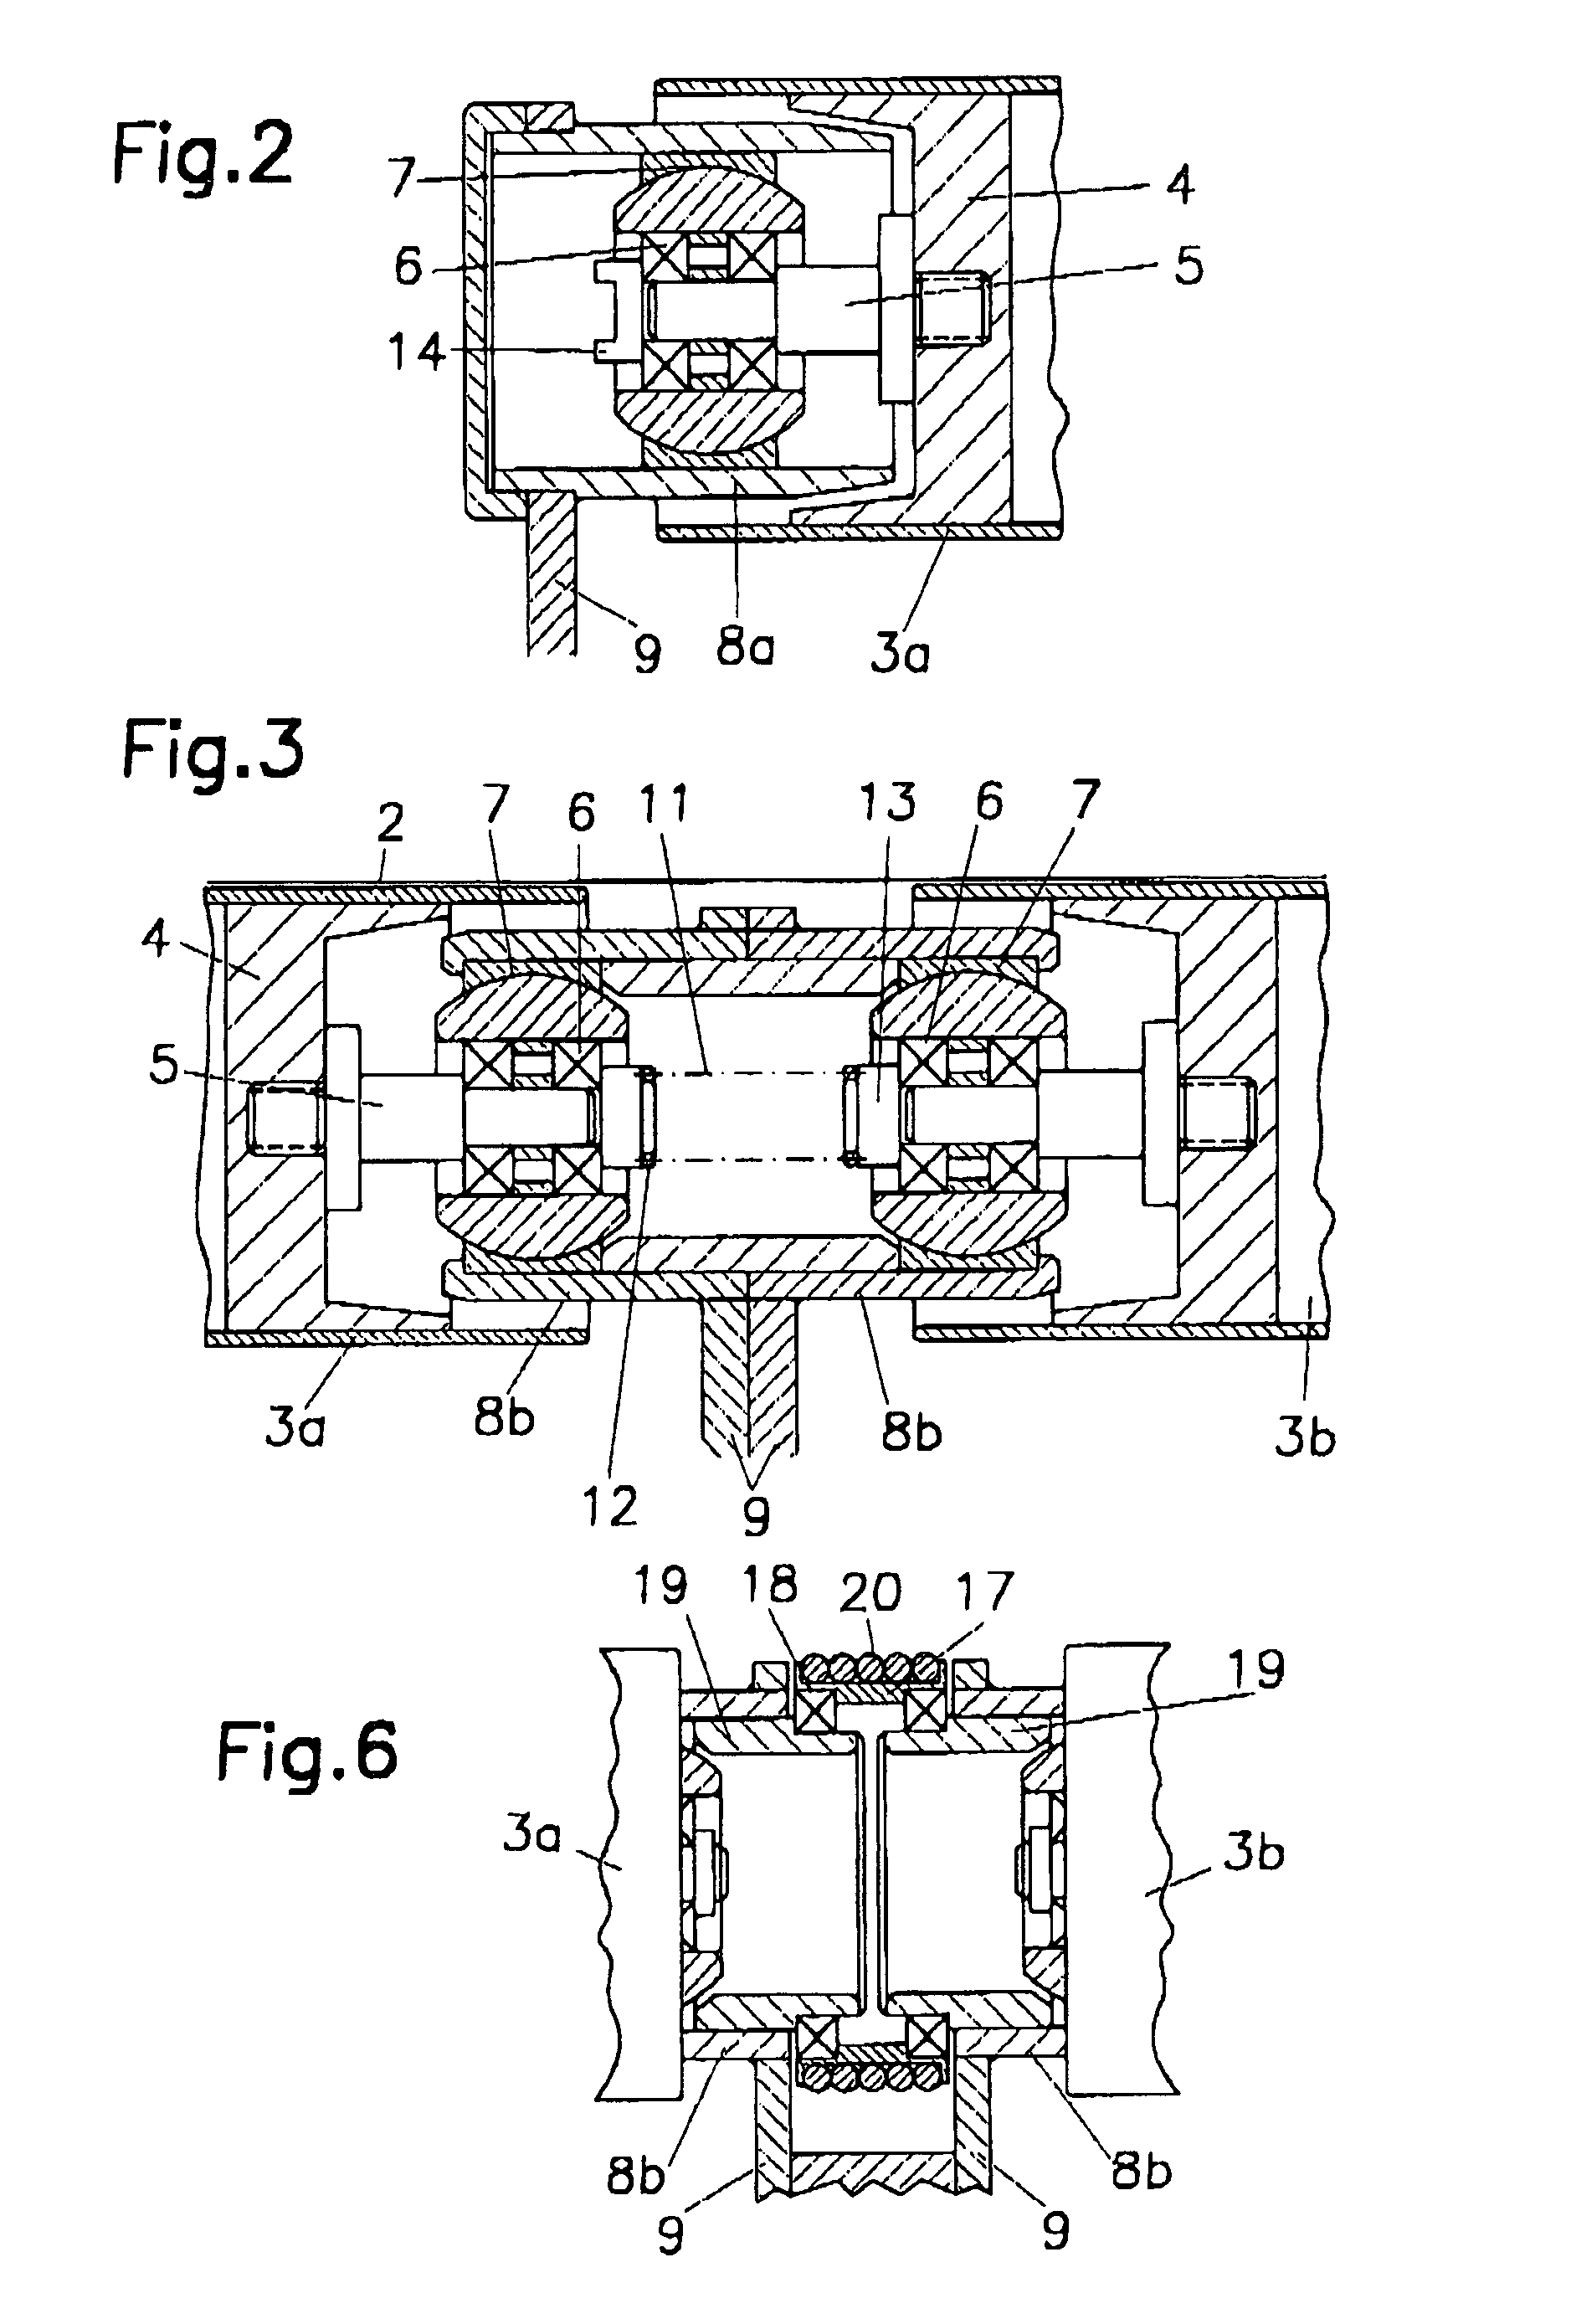 Device for stretching webs of material transversely to their travel direction